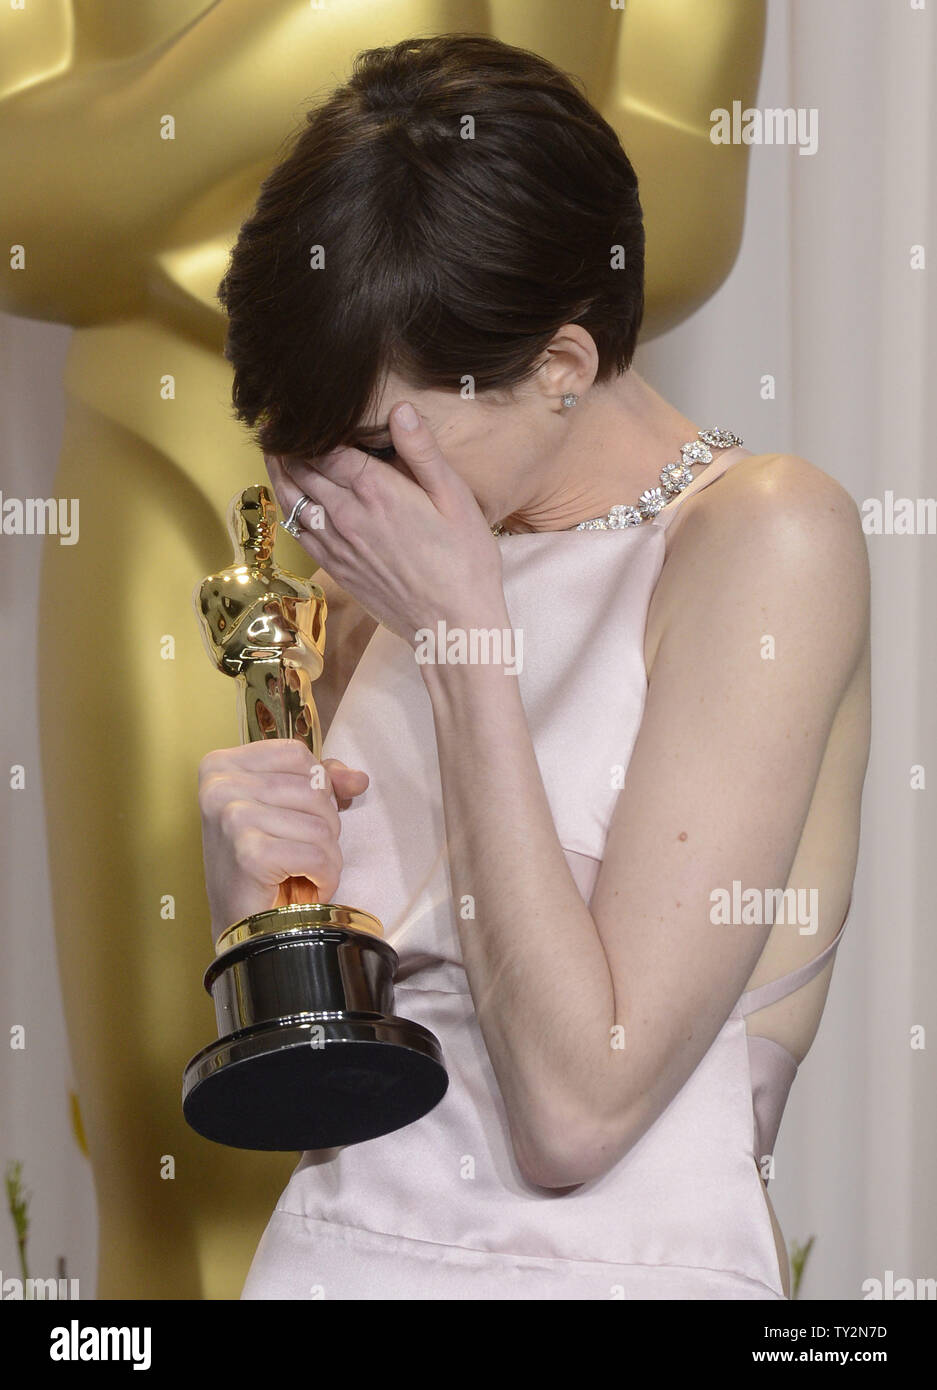 Anne Hathaway becomes emotional as she poses with her Oscar for Performance by an Actress in a Supporting Role for "Les Miserables" backstage at the 85th Academy Awards at the Hollywood and Highlands Center in the Hollywood section of Los Angeles on February 24, 2013. UPI/Phil McCarten Stock Photo